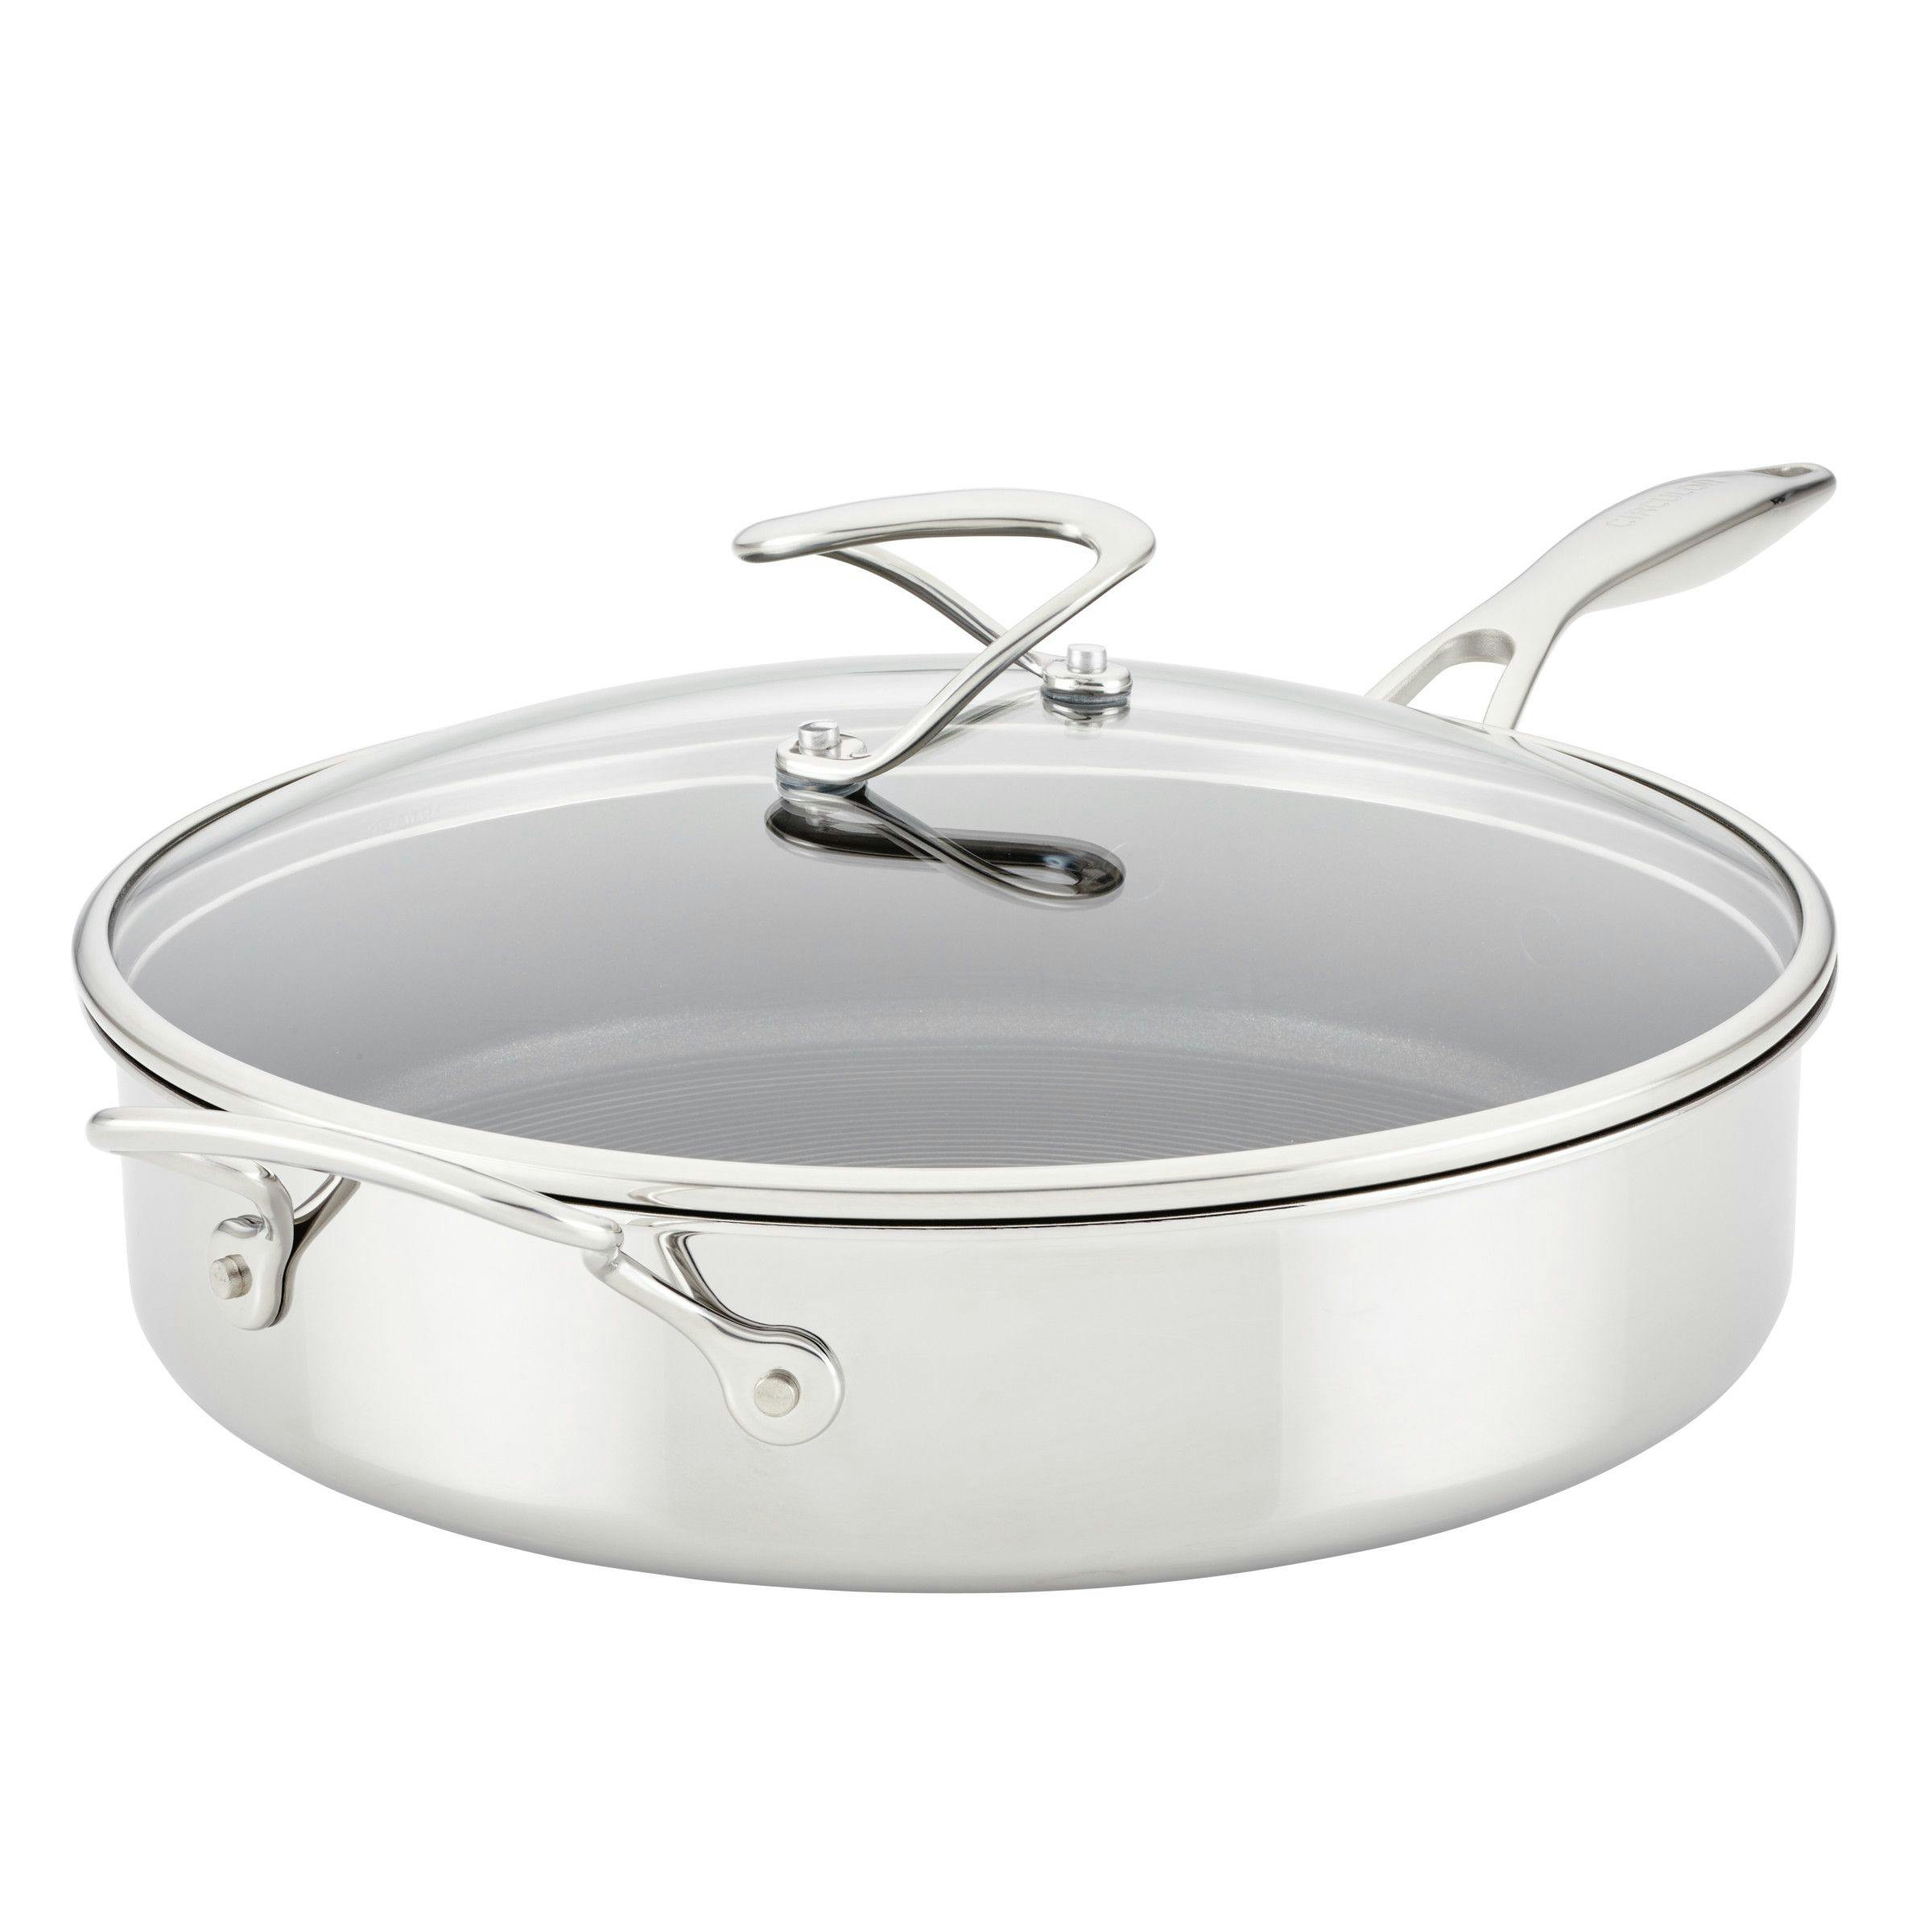 Circulon Clad Stainless Steel Saute Pan with Lid and Hybrid SteelShield and Nonstick Technology, 5-Quart, Silver